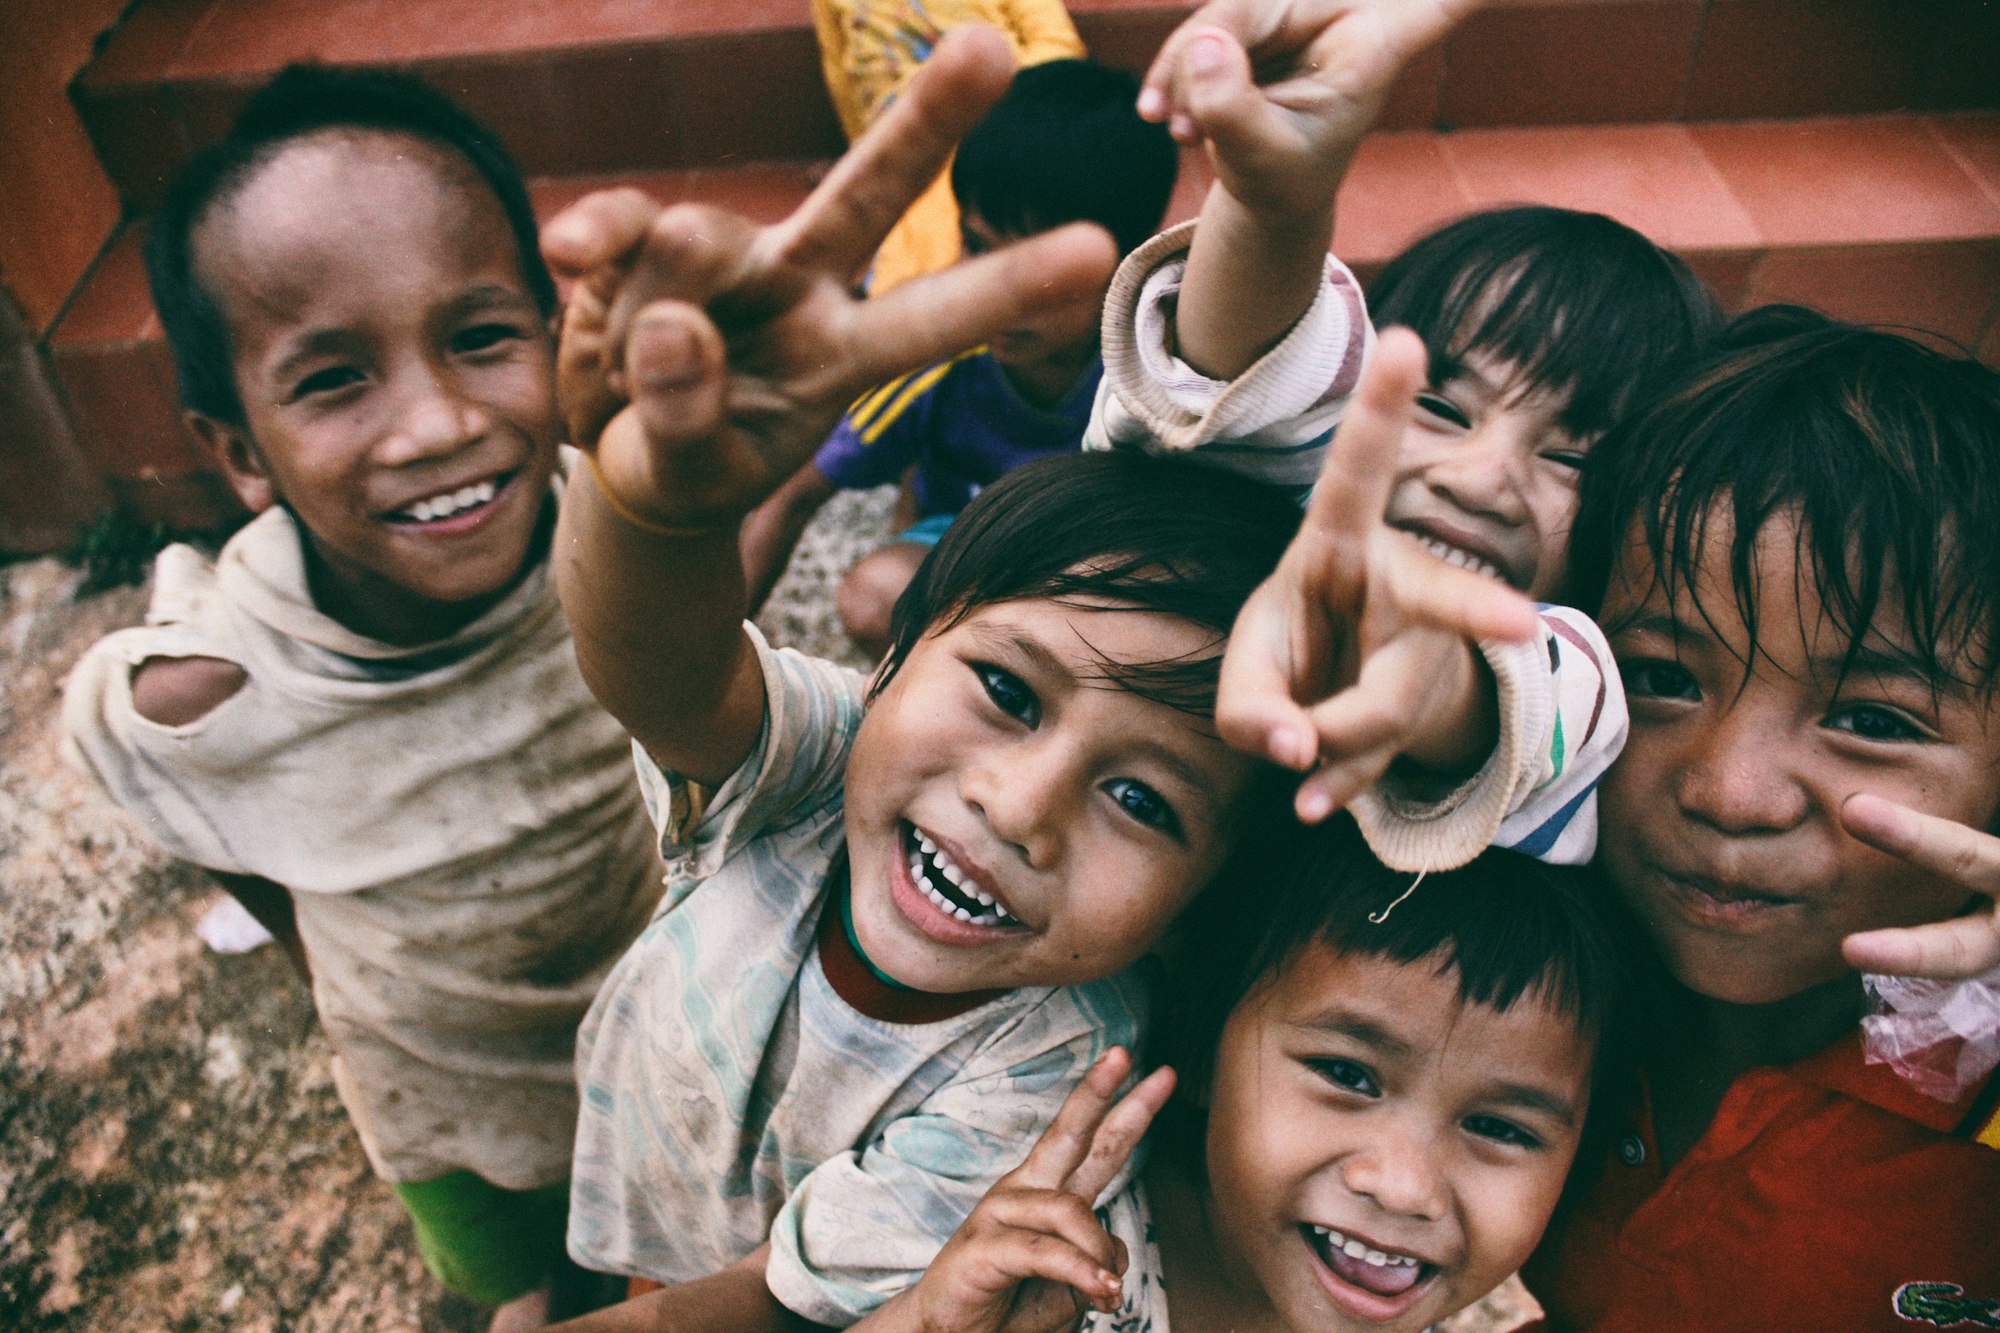 Happiness of the poor children.
Taken in Chupah district, Gialai province Vietnam.